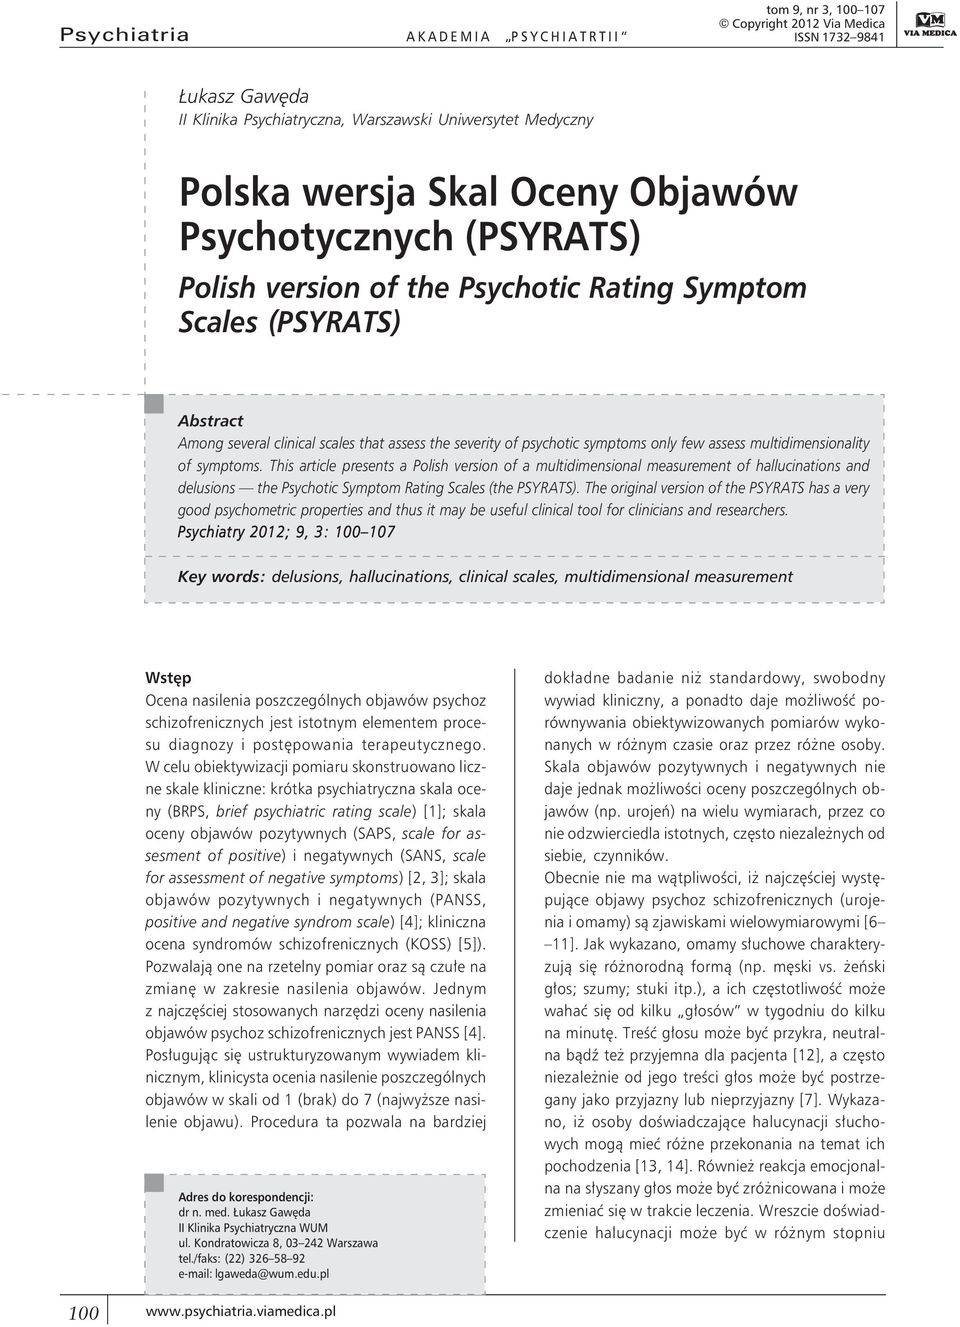 multidimensionality of symptoms. This article presents a Polish version of a multidimensional measurement of hallucinations and delusions the Psychotic Symptom Rating Scales (the PSYRATS).